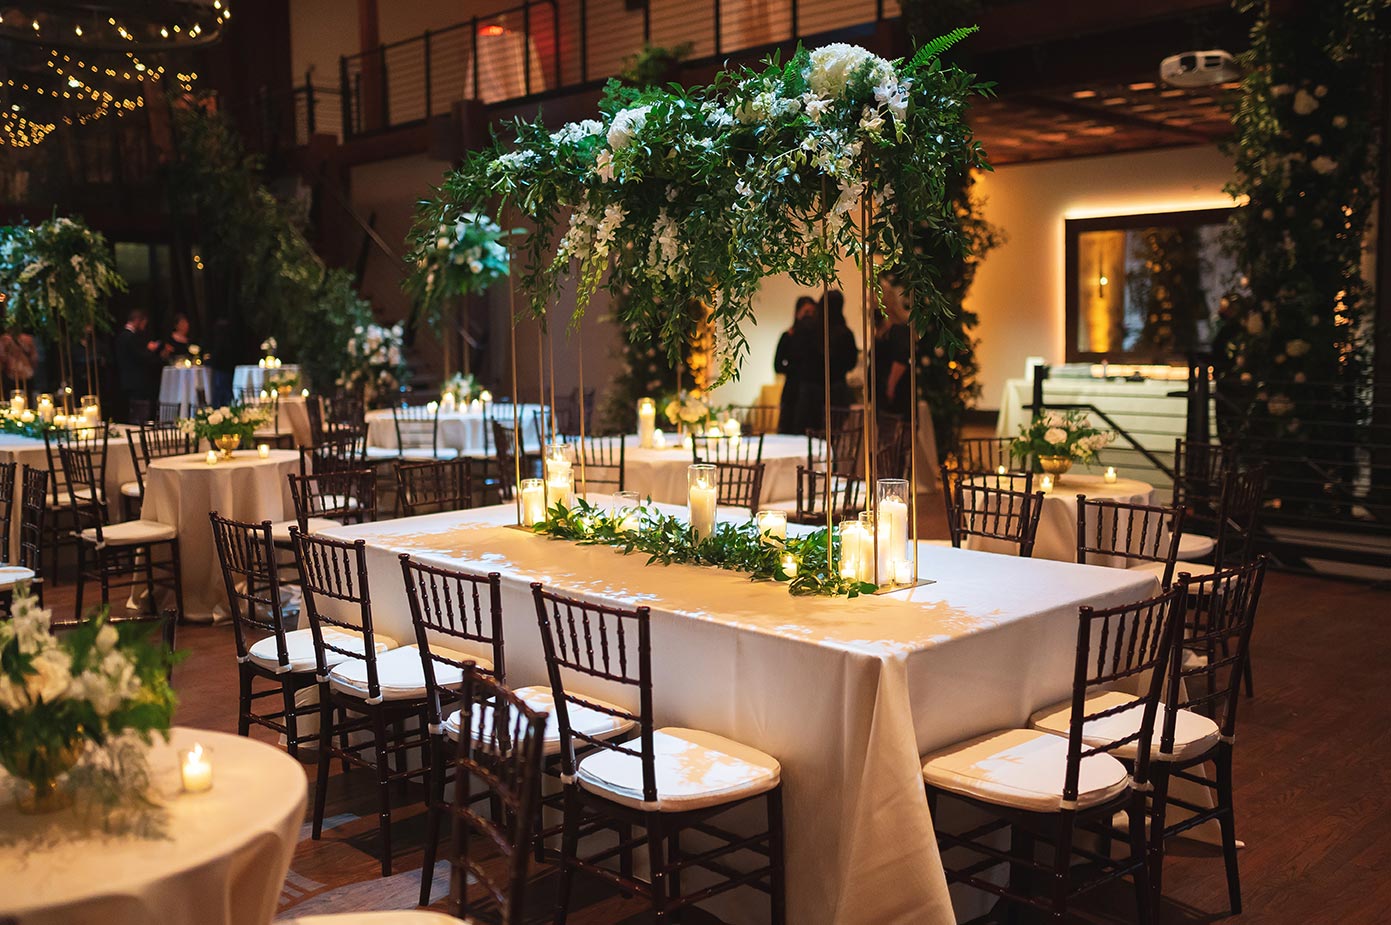 Kings table with white linen elevated greenery and white roses